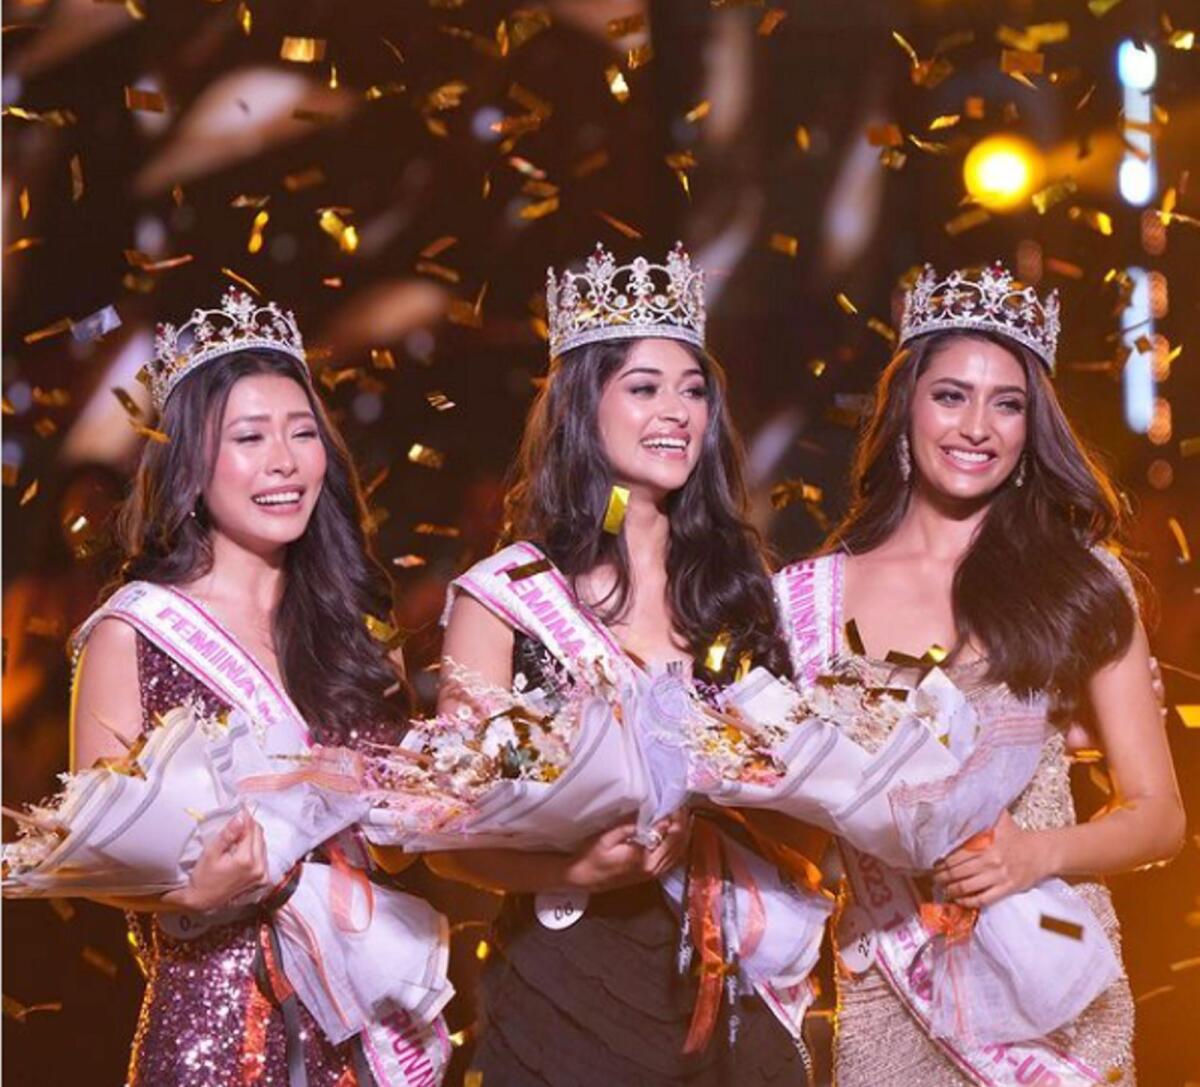 Nandini Gupta was crowned  Femina Miss India World 2023, Shreya Poonja from Delhi, finished as the first runner-up and Manipur's Thounaojam Strela Luwang was the second runner-up.